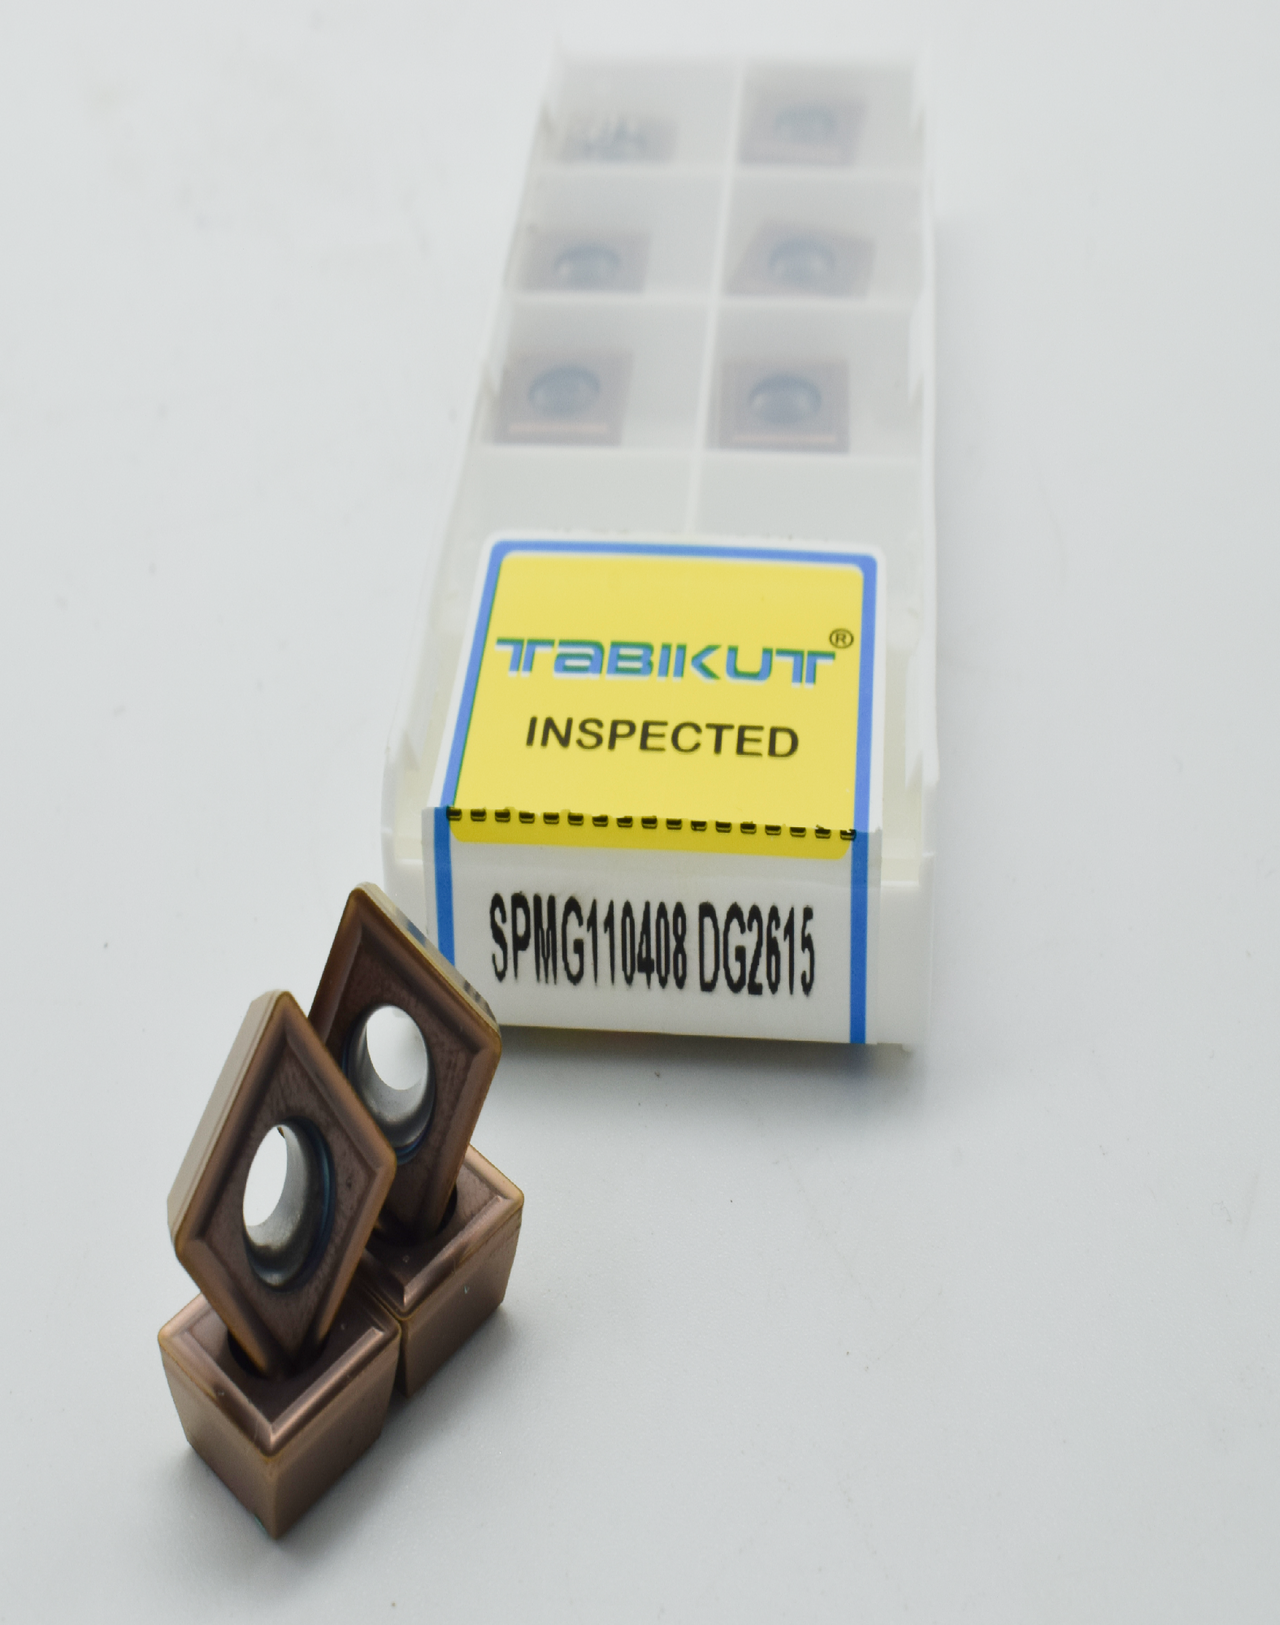 SPMG110408 DG2615 Carbide Drilling Insert For Indexable U Drill copper Pack Of 10